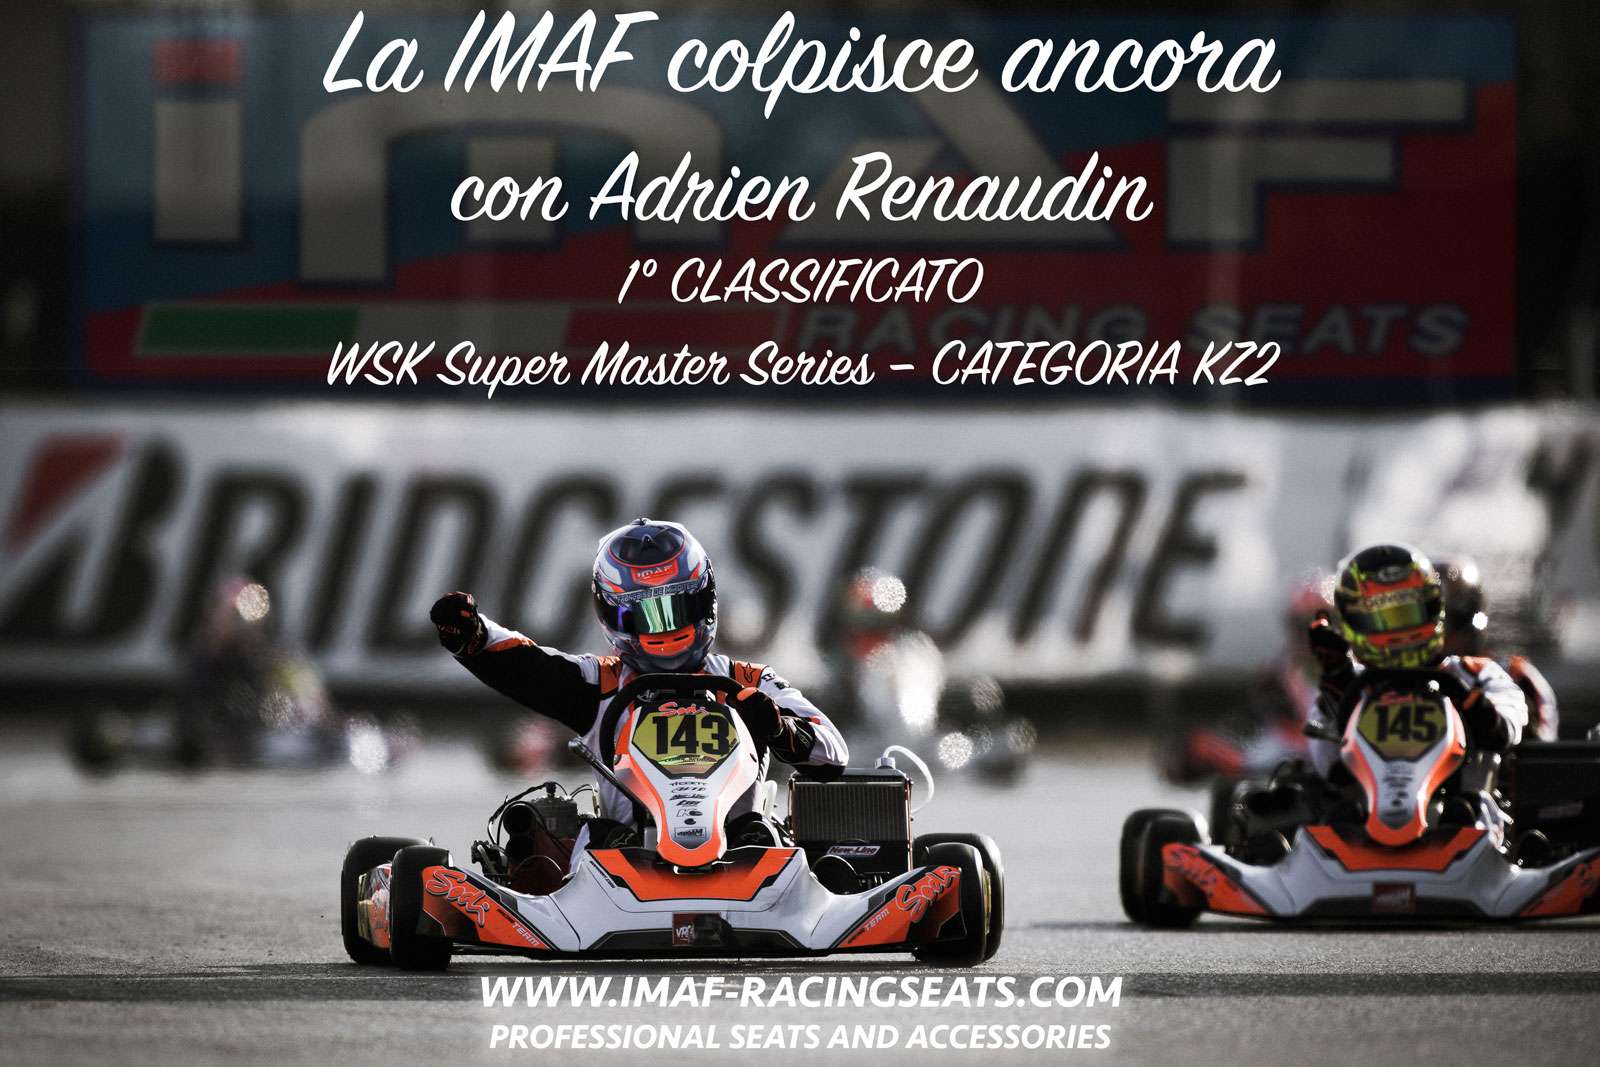 The IMAF strikes again with Adrien Renaudin